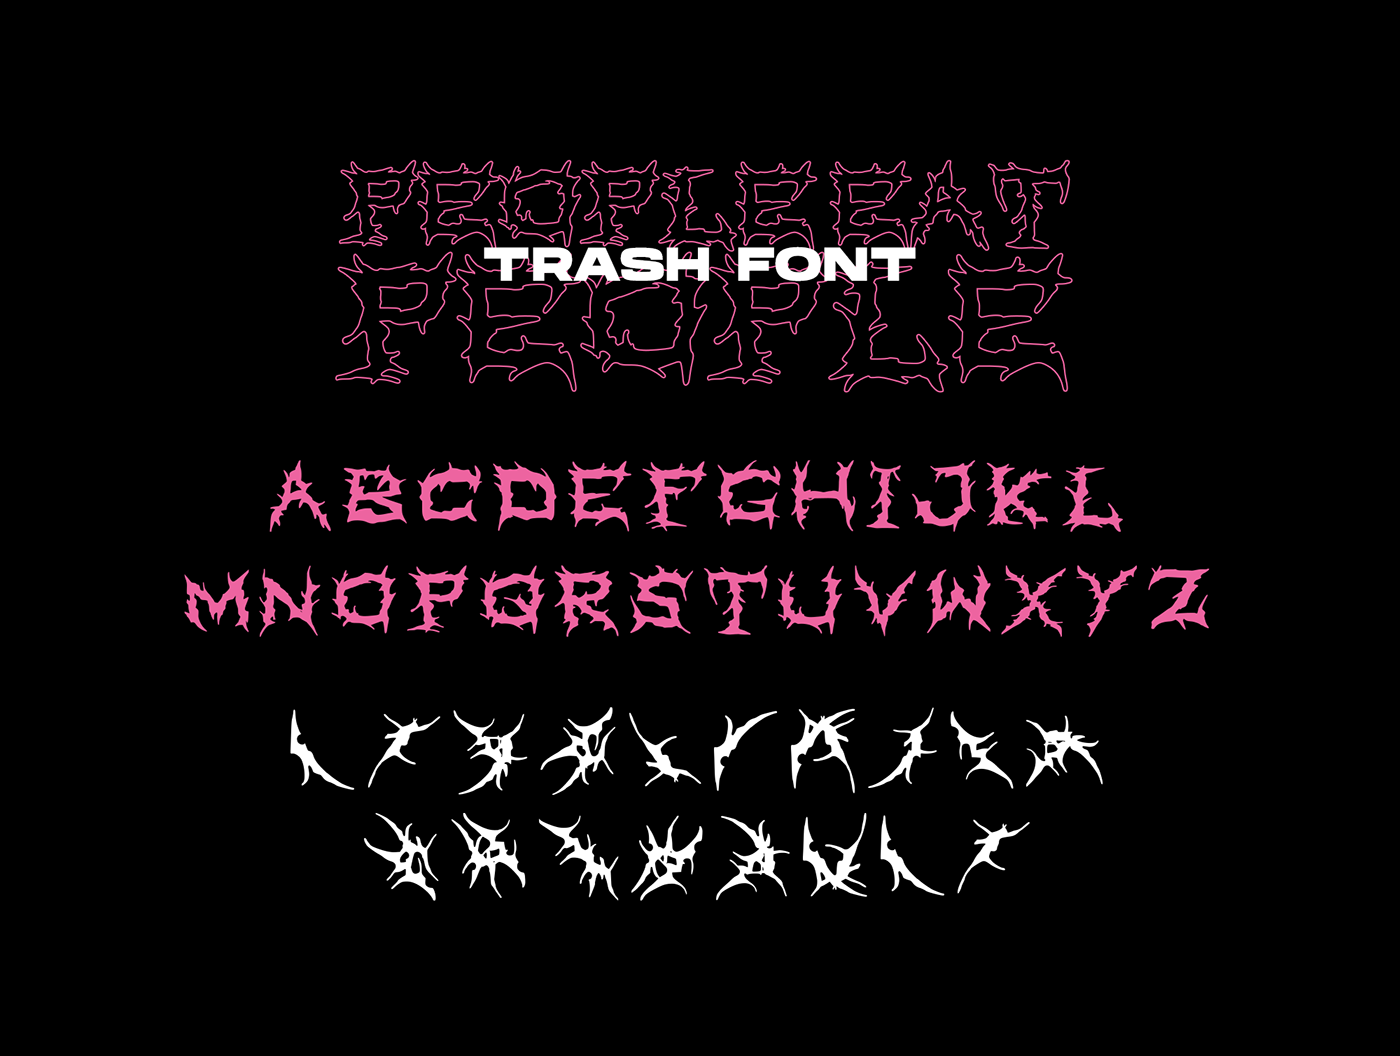 Art Cover Free font free type face metal font sick again trash font Trash Type type typography   Typeface